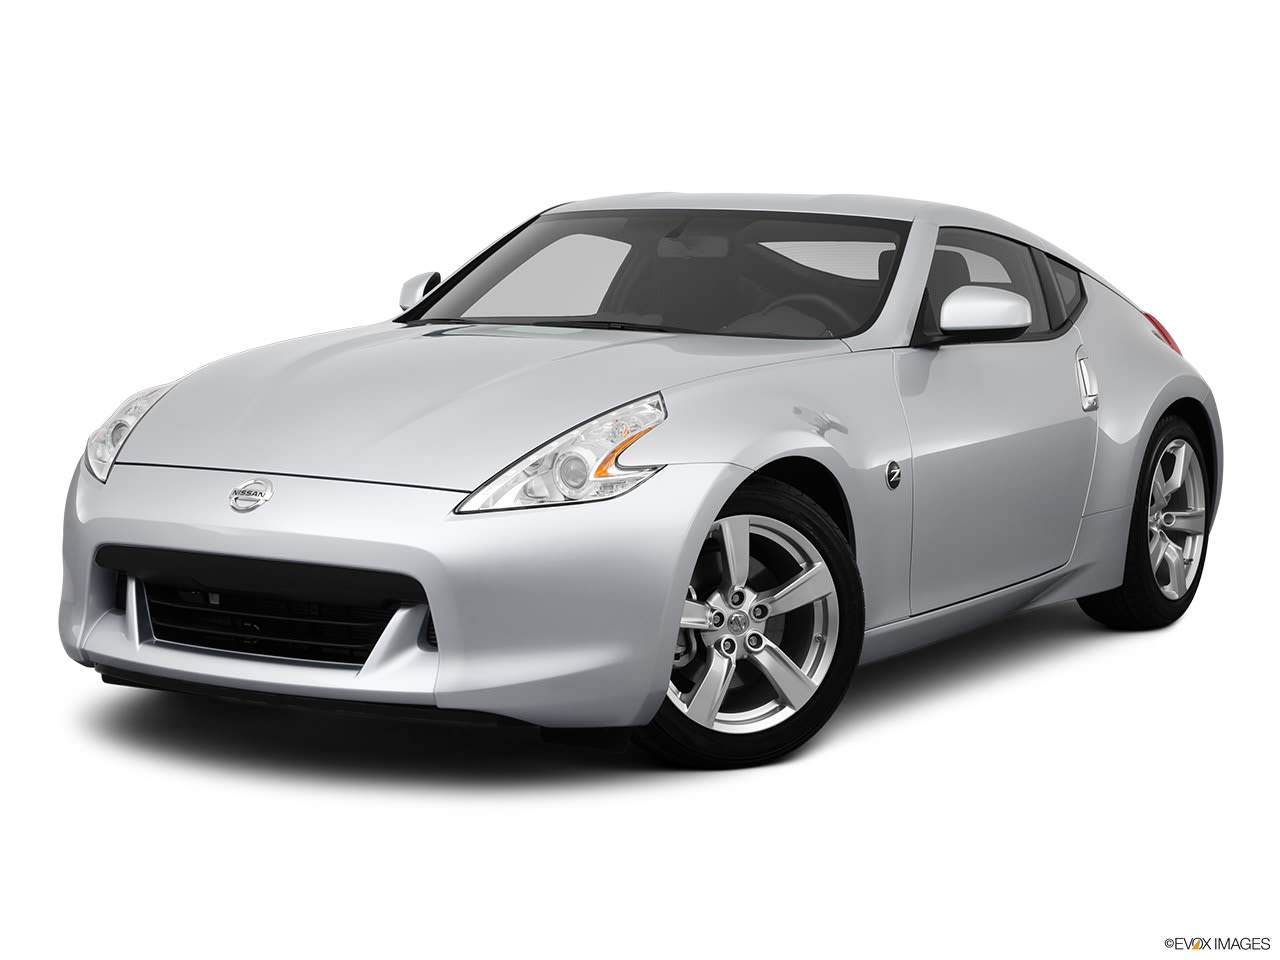 A Buyer's Guide to the 2012 Nissan 370Z | YourMechanic Advice